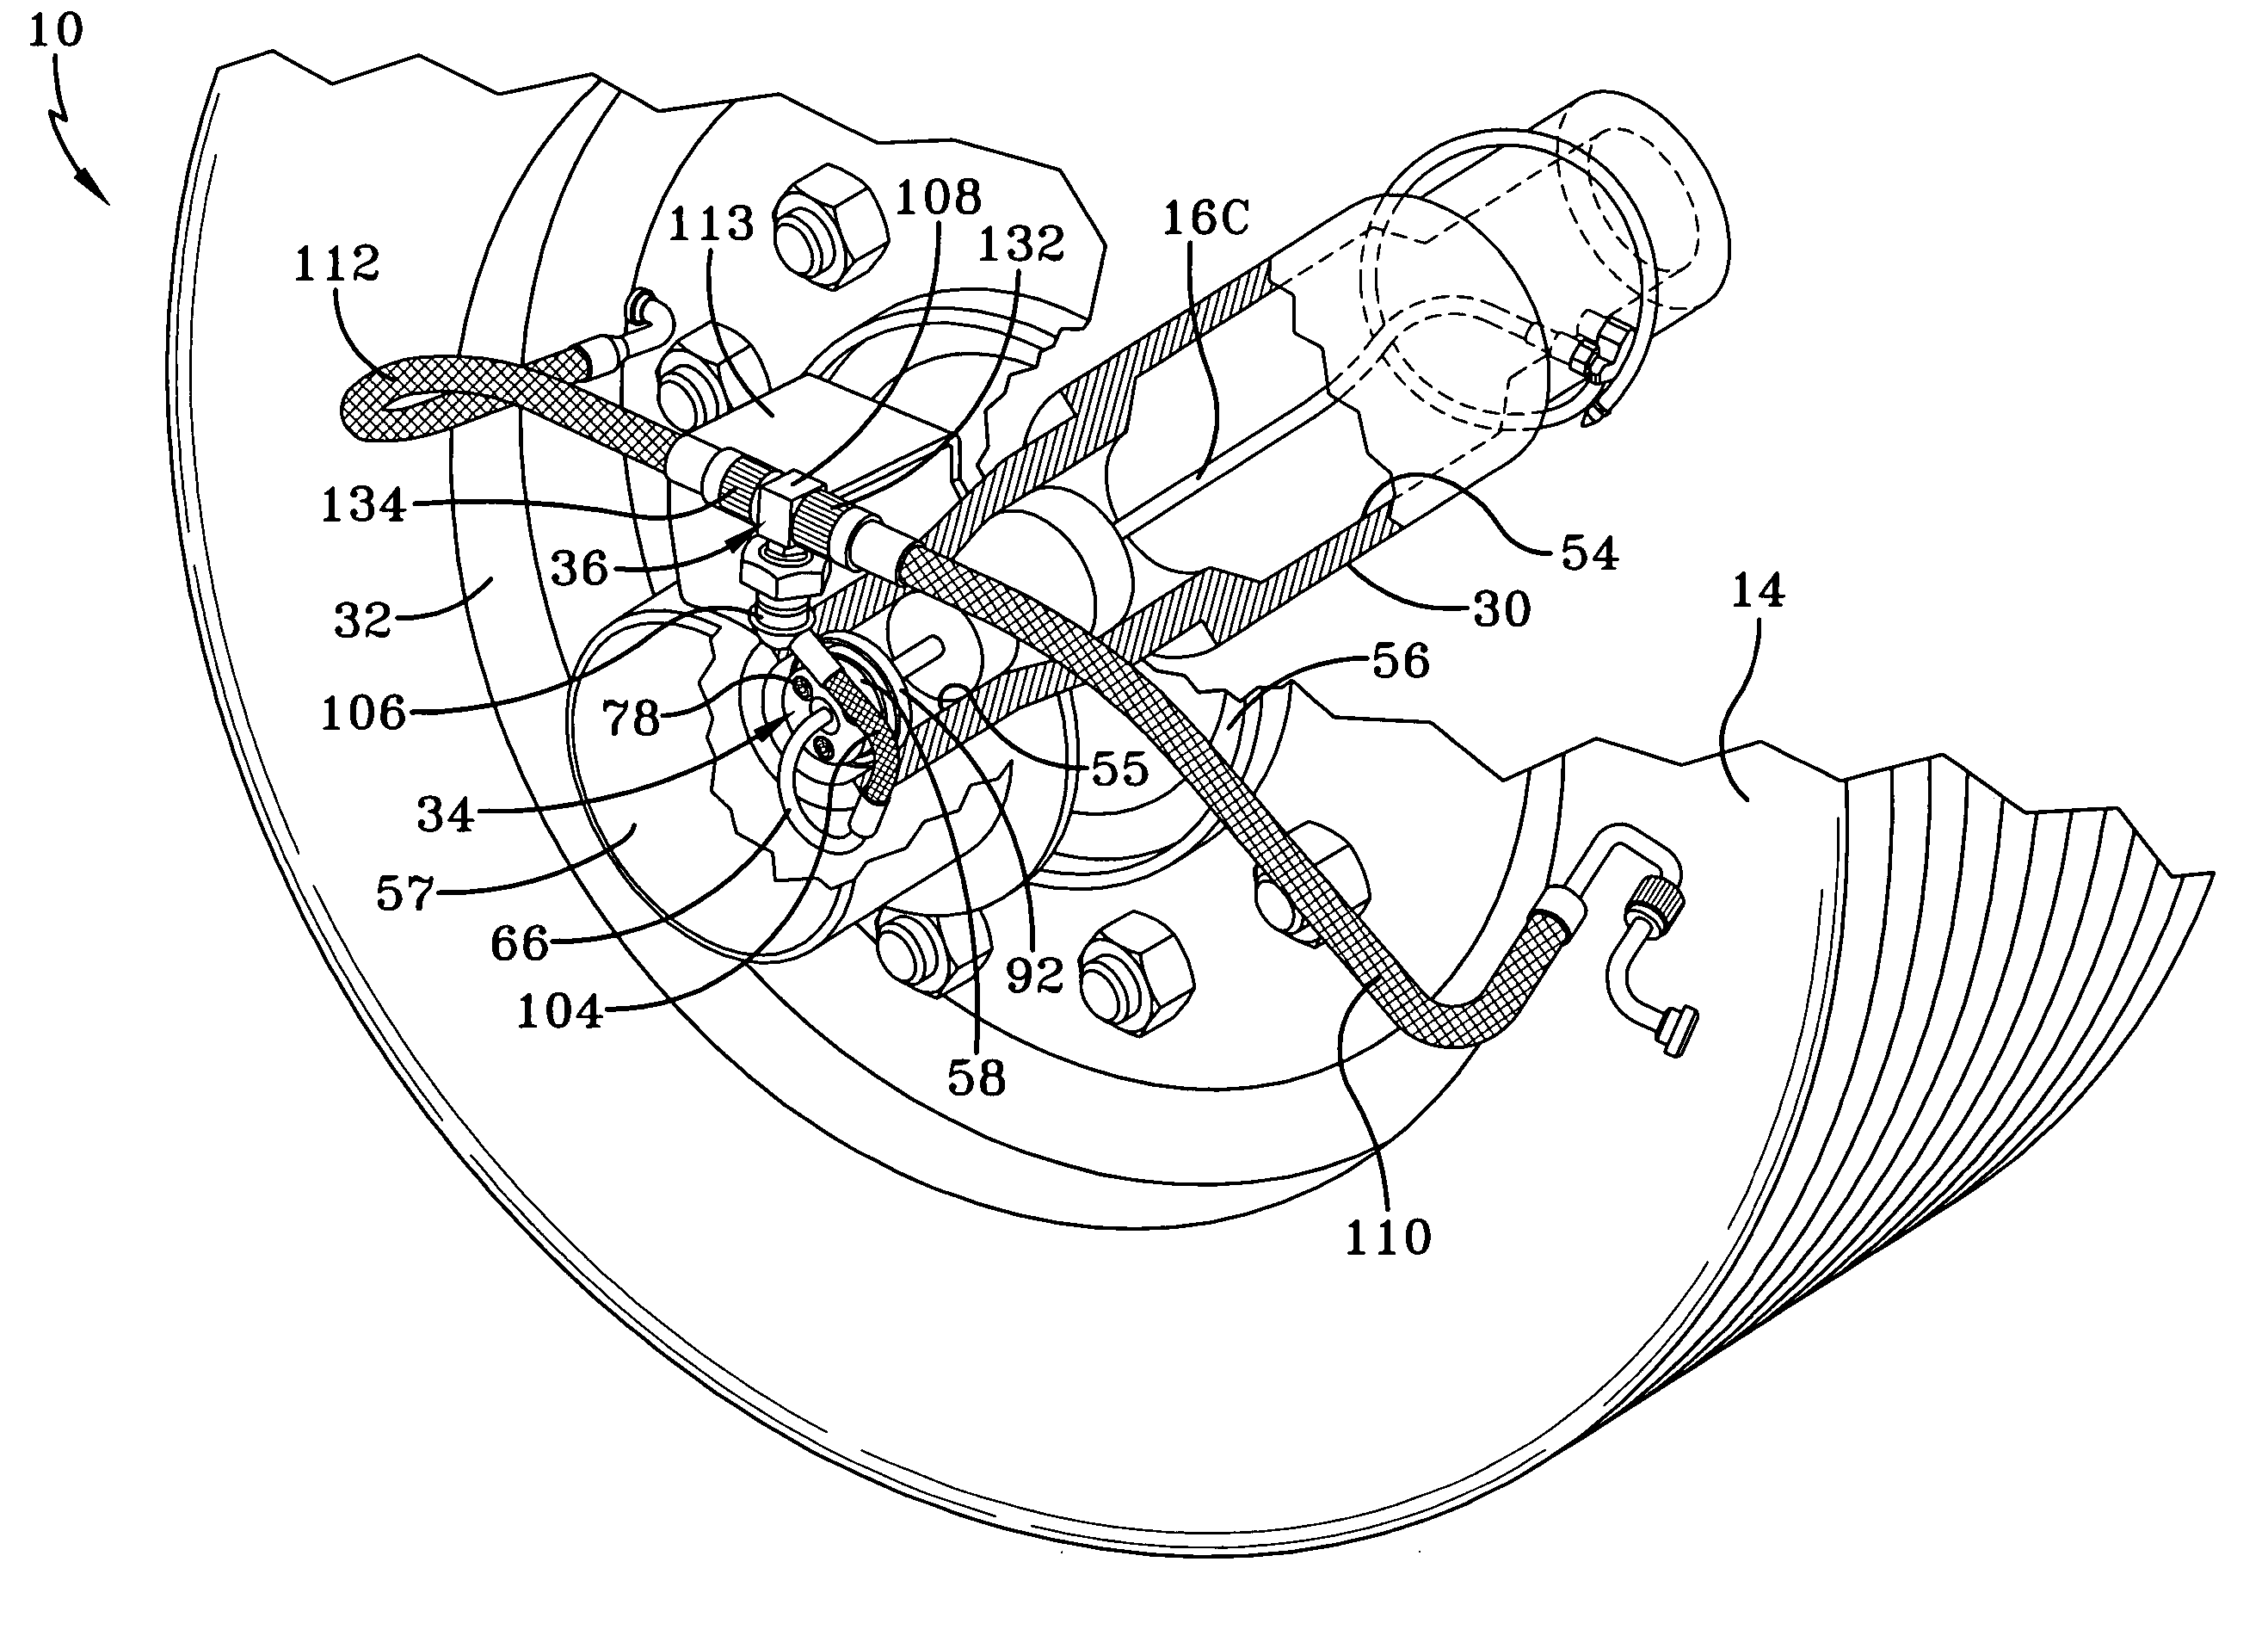 Tire inflation system apparatus and method